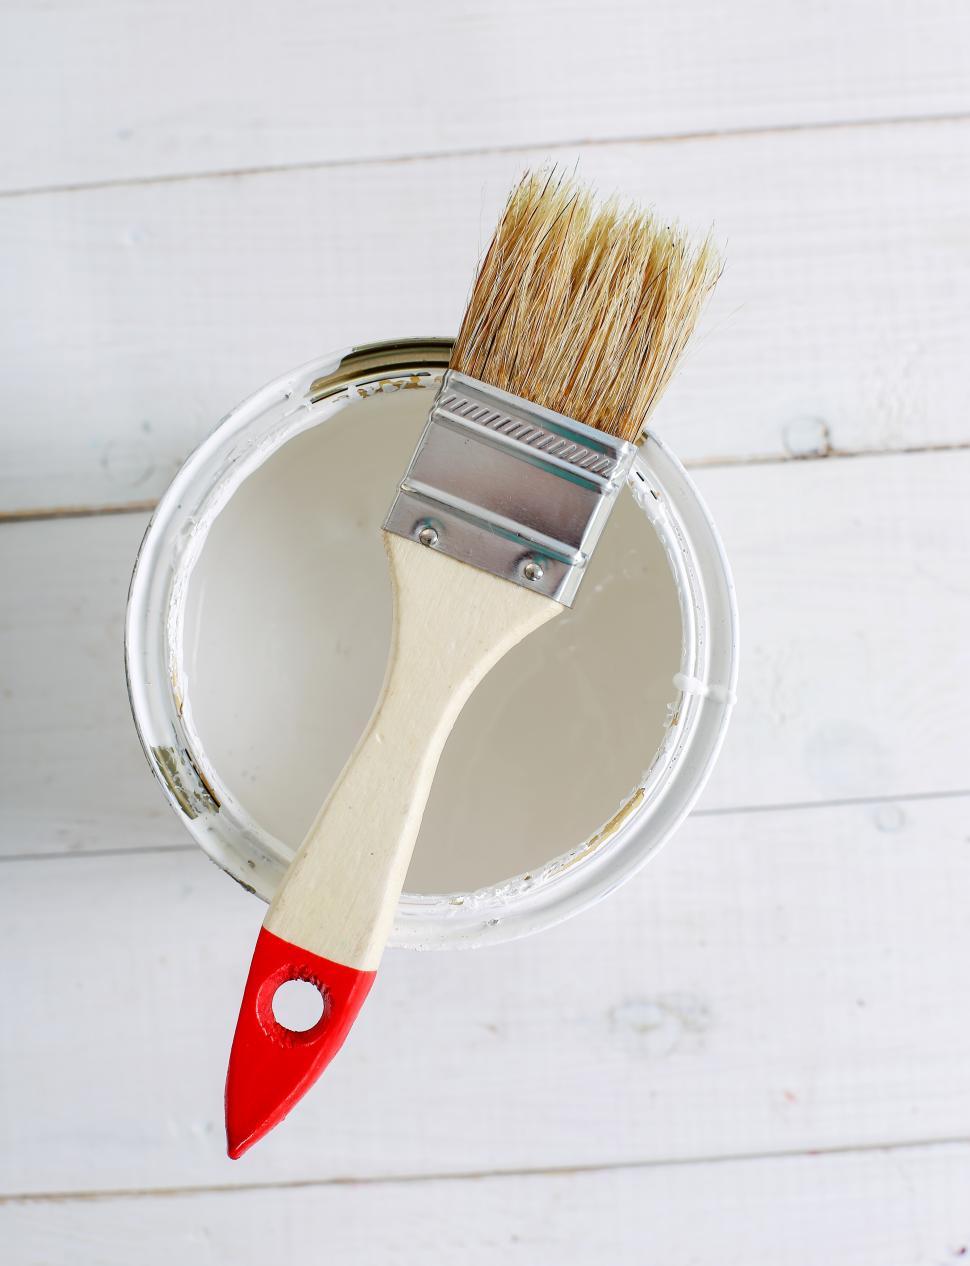 Free Image of Paintbrush on a can of paint 